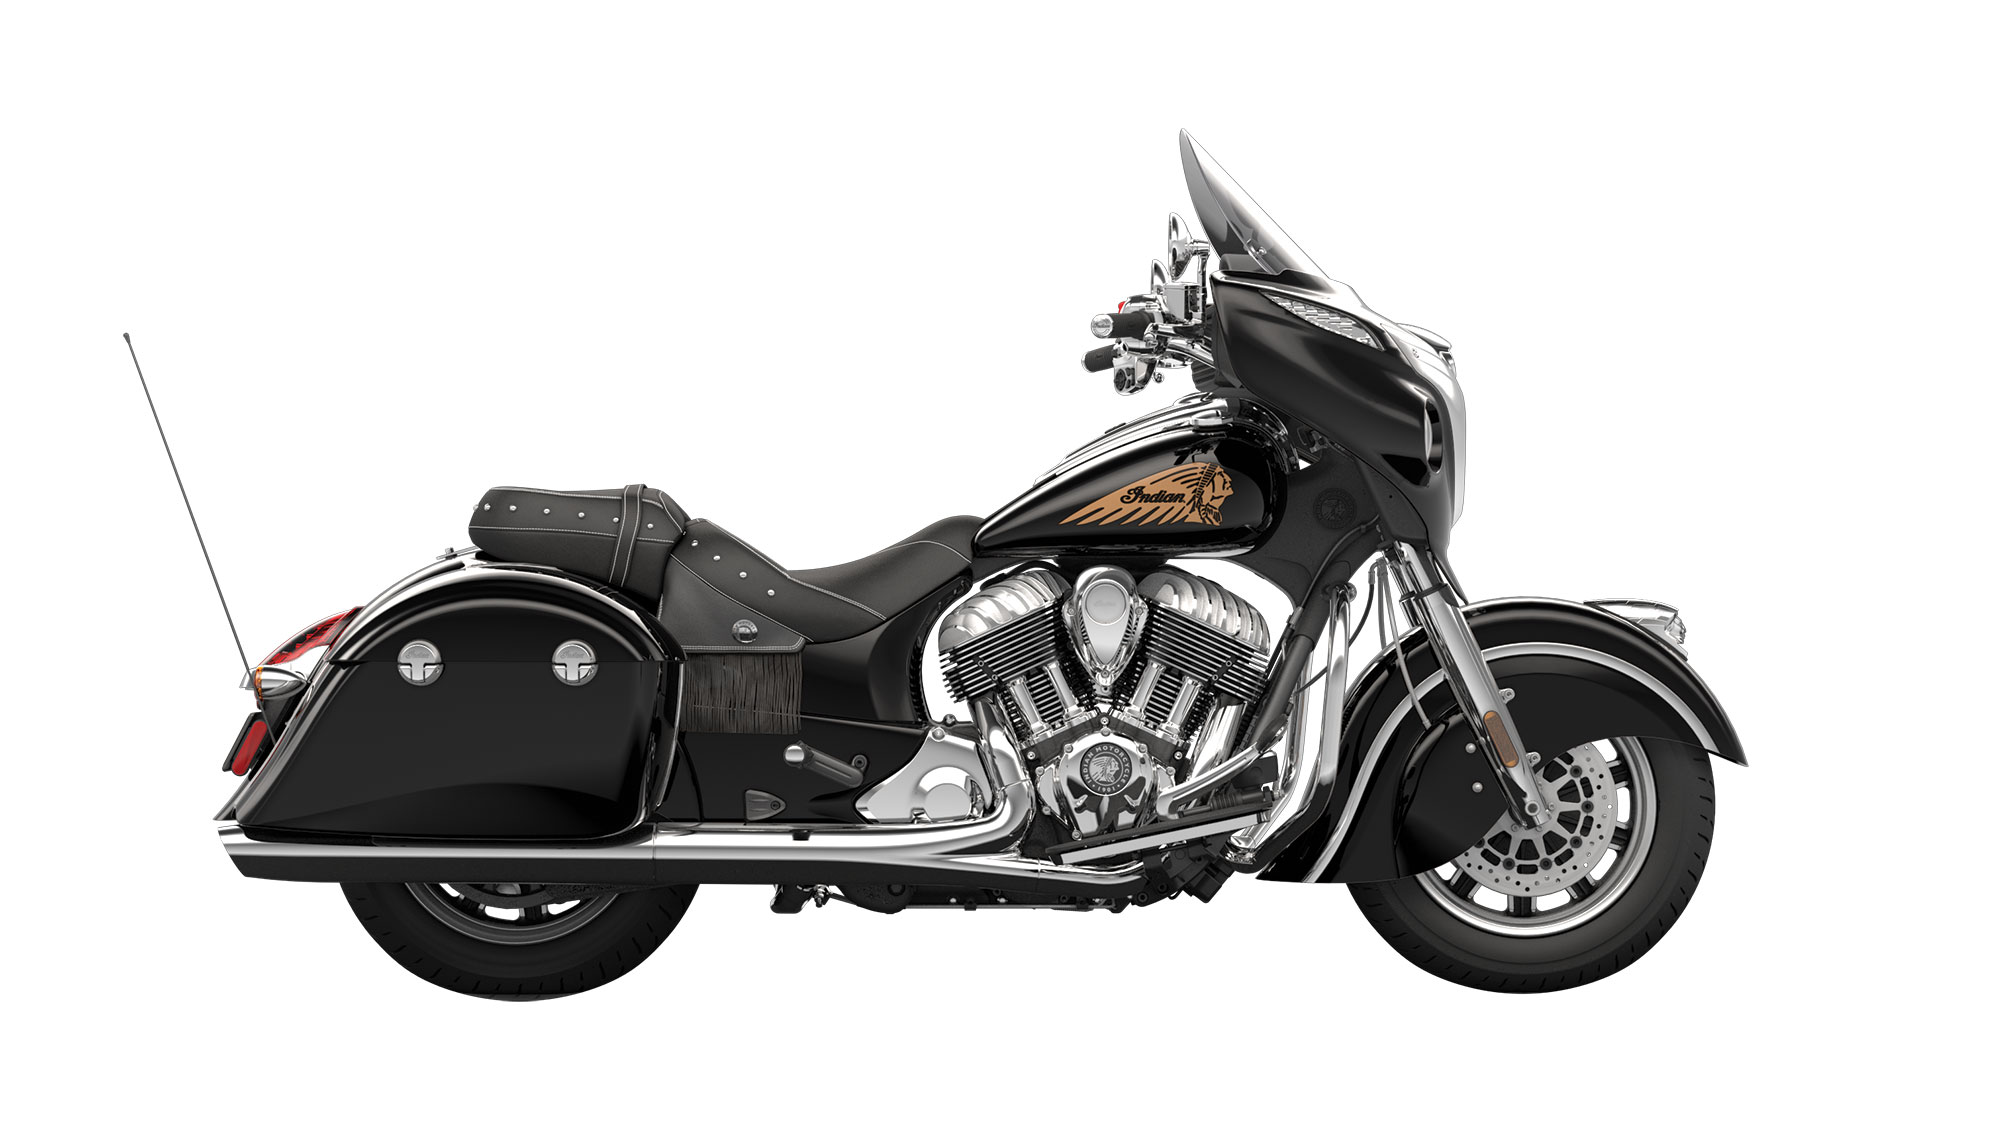 2014, Indian, Chieftain, Motorbike, Ds Wallpaper